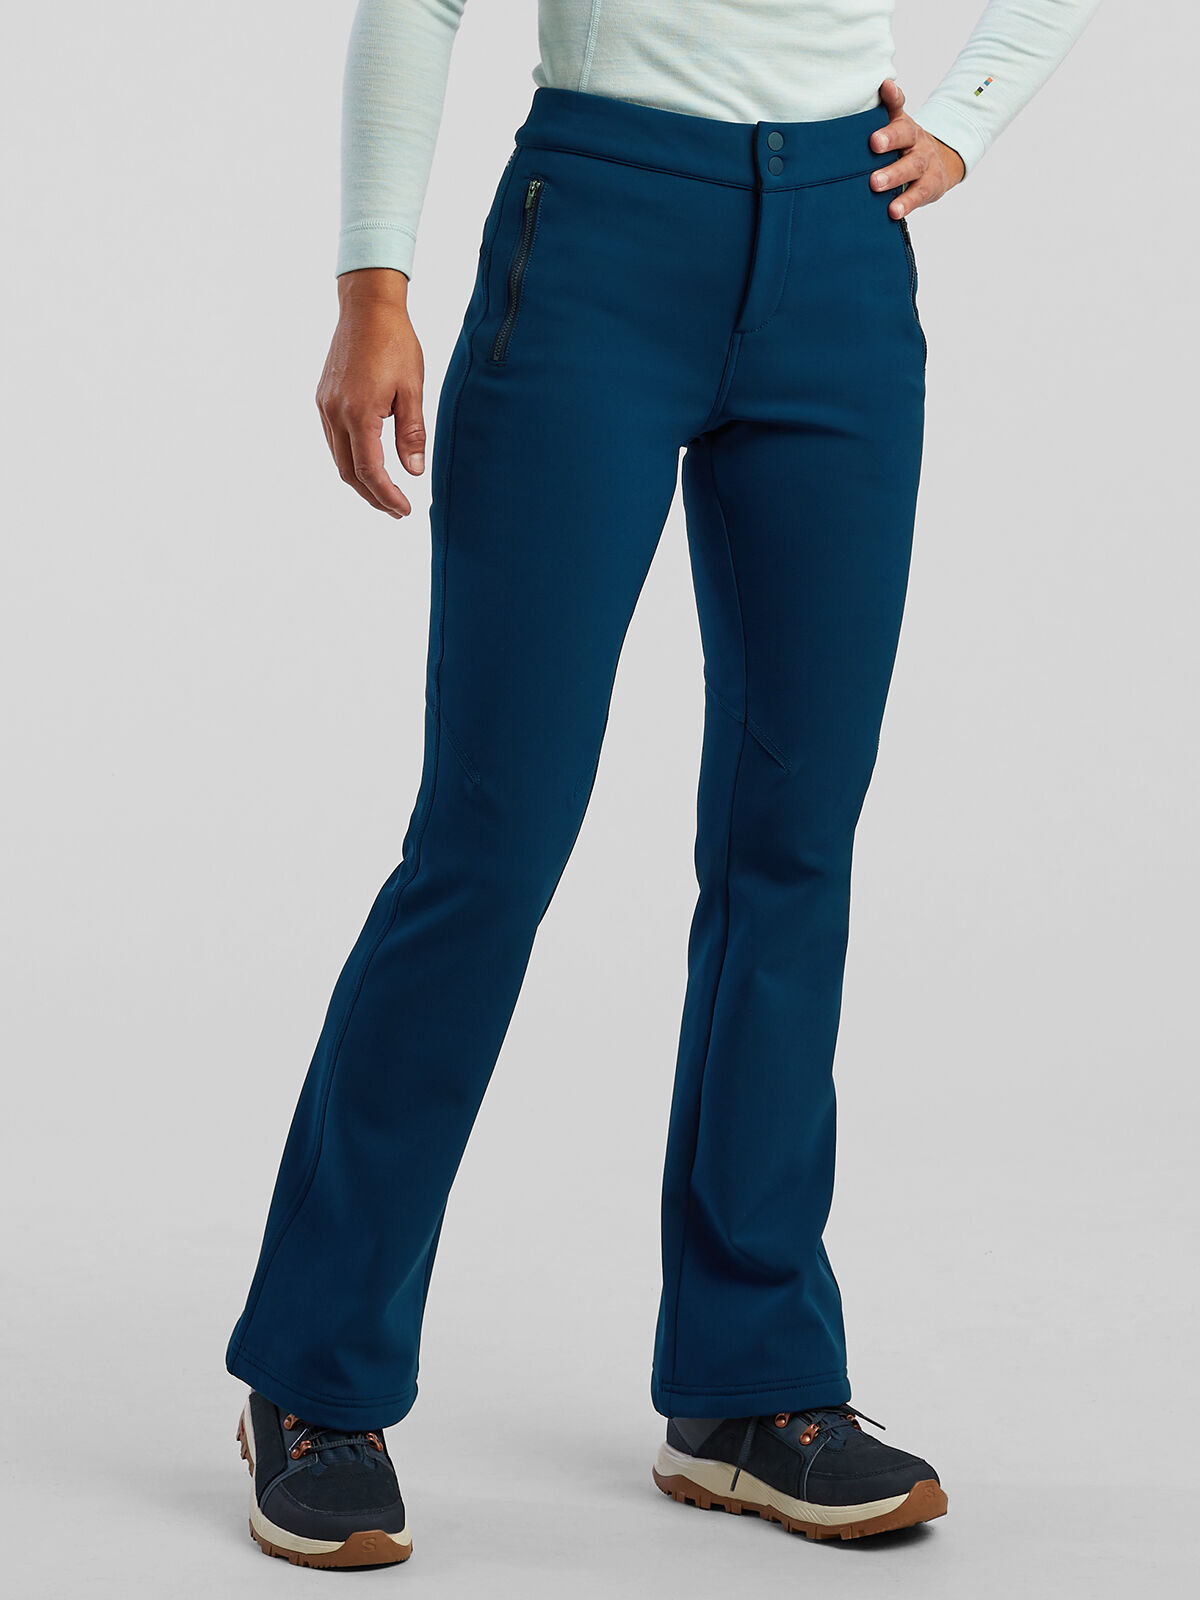 Slim Stretch Marle Tailored Pant - Winter White - Slim Stretch Marle  Tailored Pant | Suit Pants | Politix